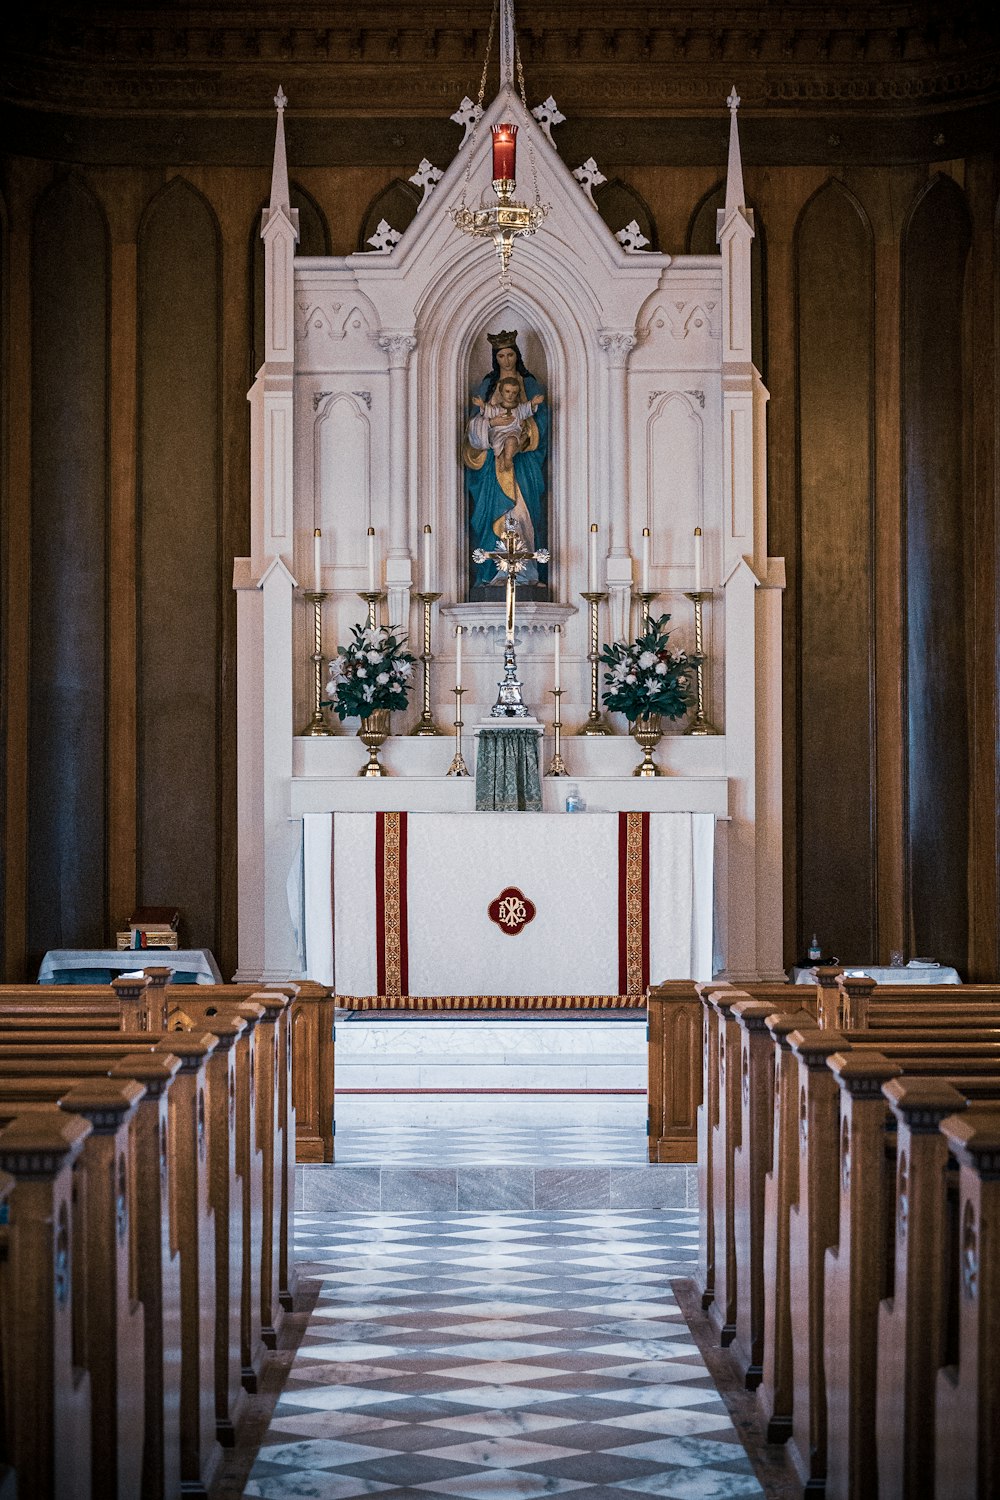 the interior of a church with pews and a alter